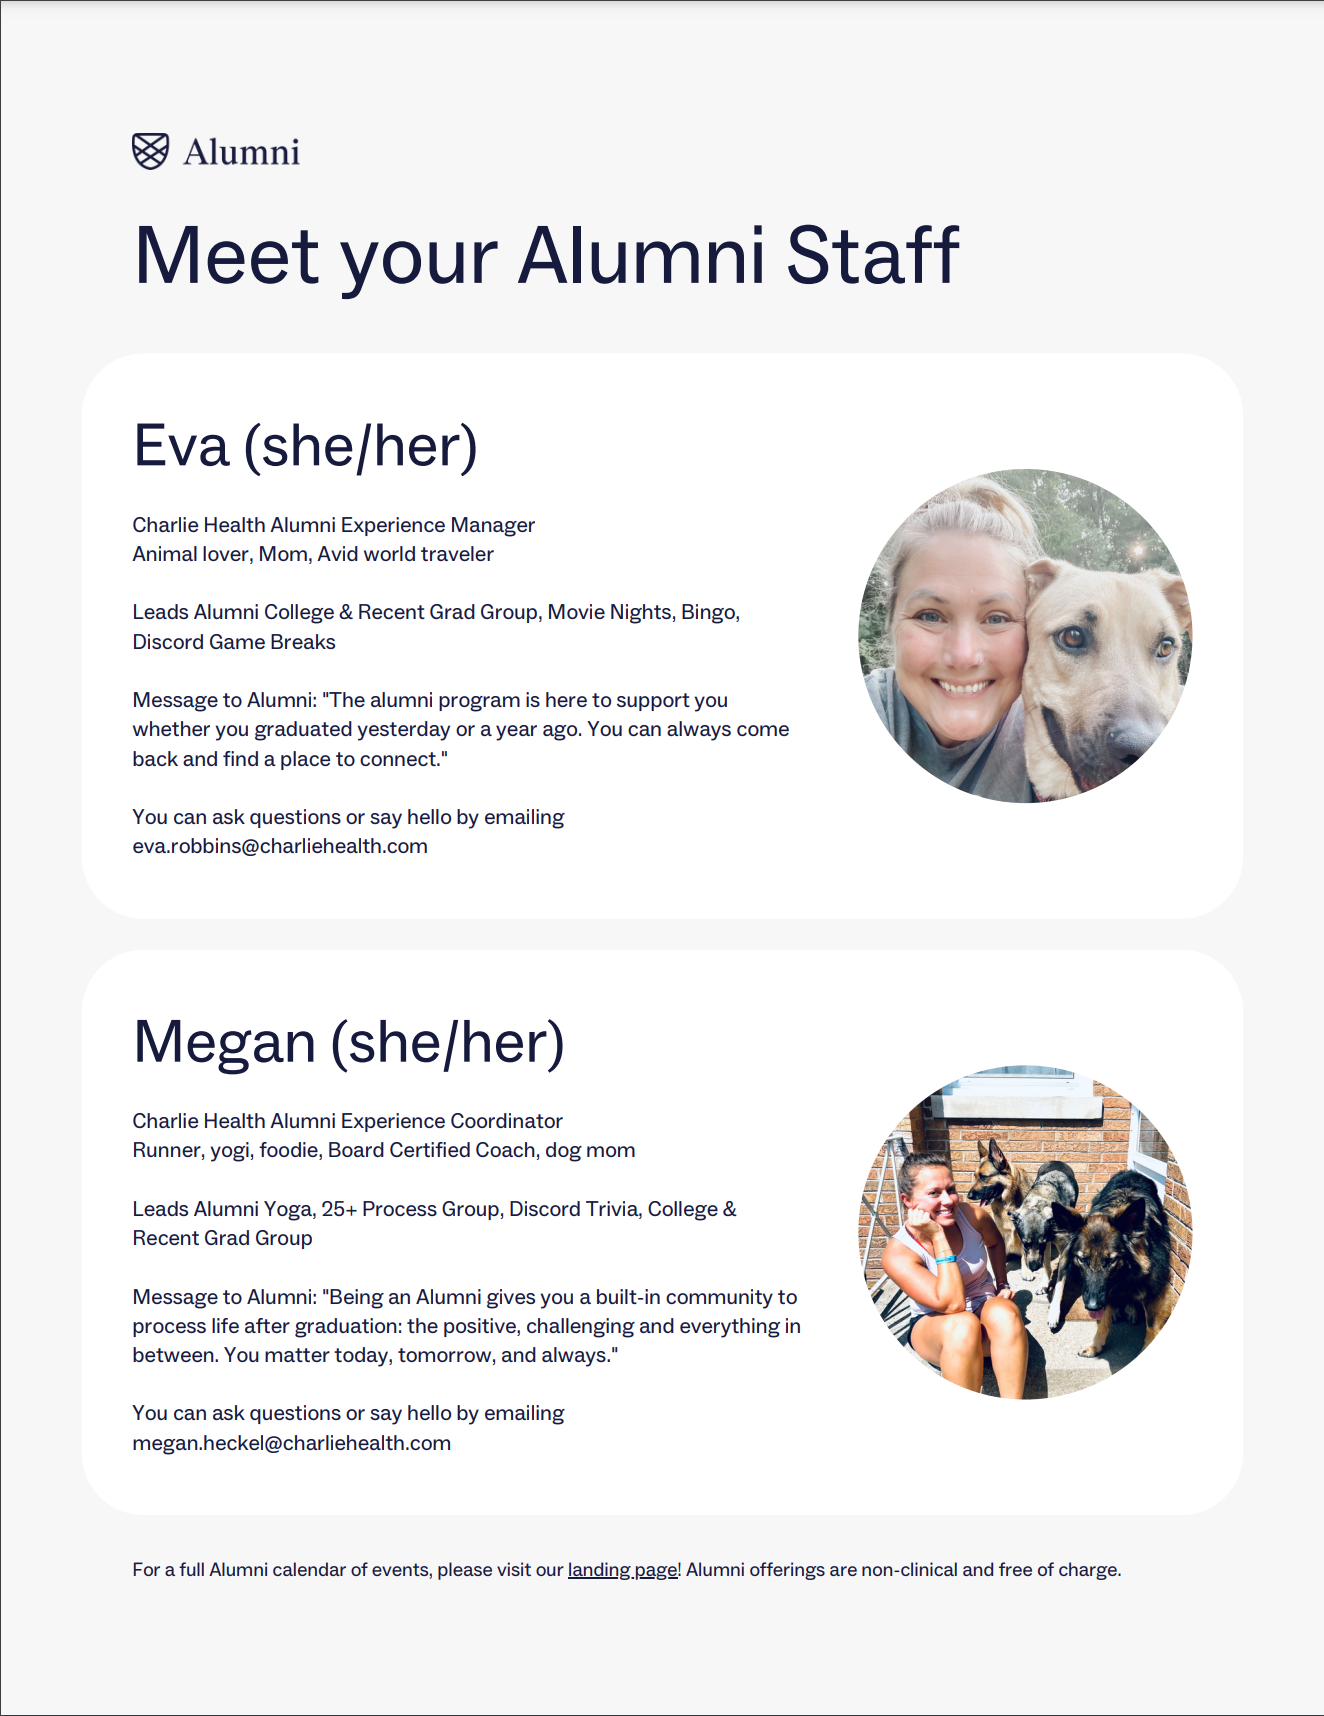 Alumni Staff Name and Pictures